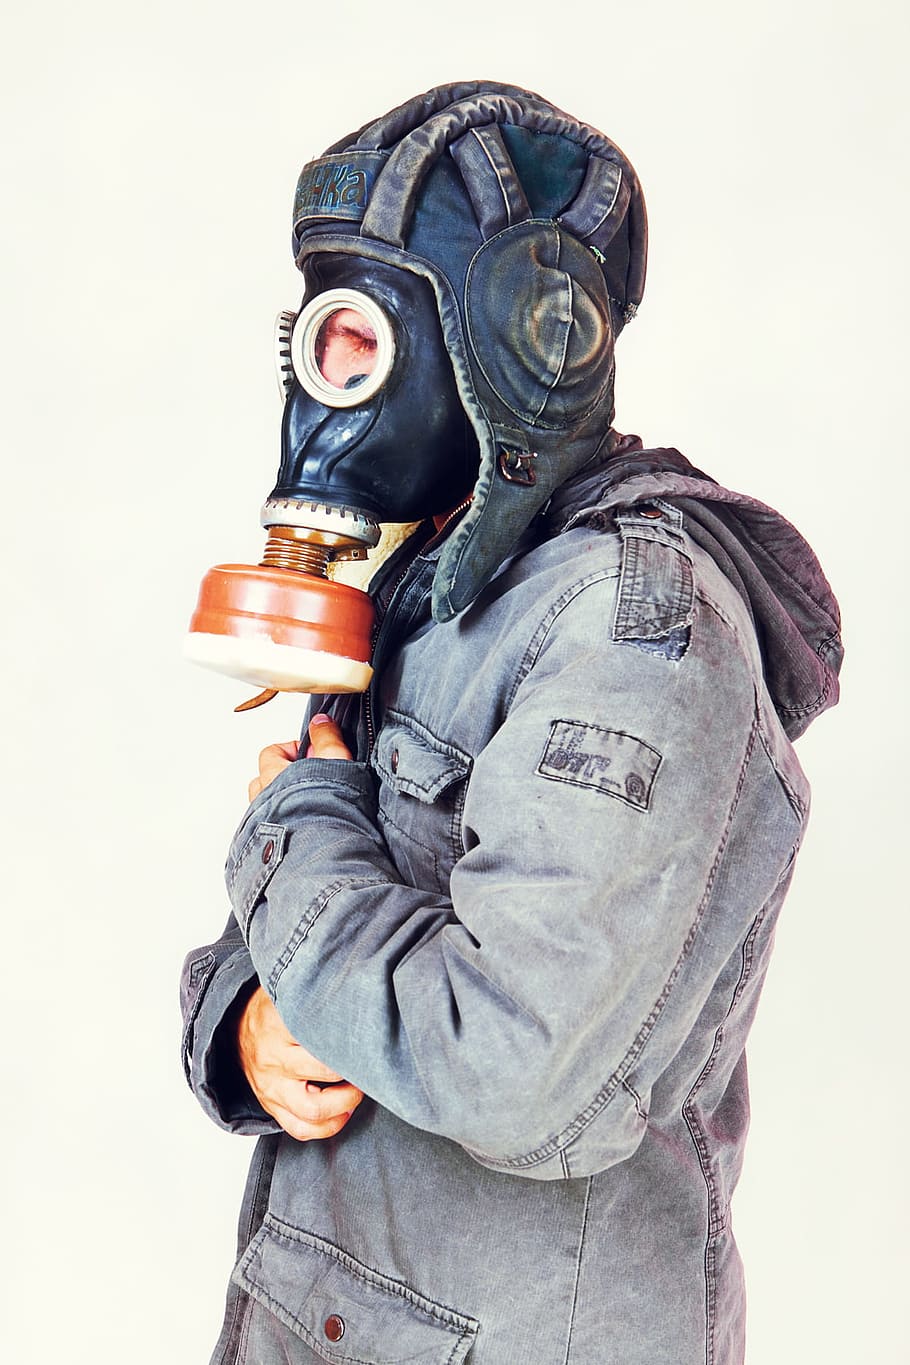 adult, arms, chemical, concept, danger, disaster, environment, equipment, face, filter